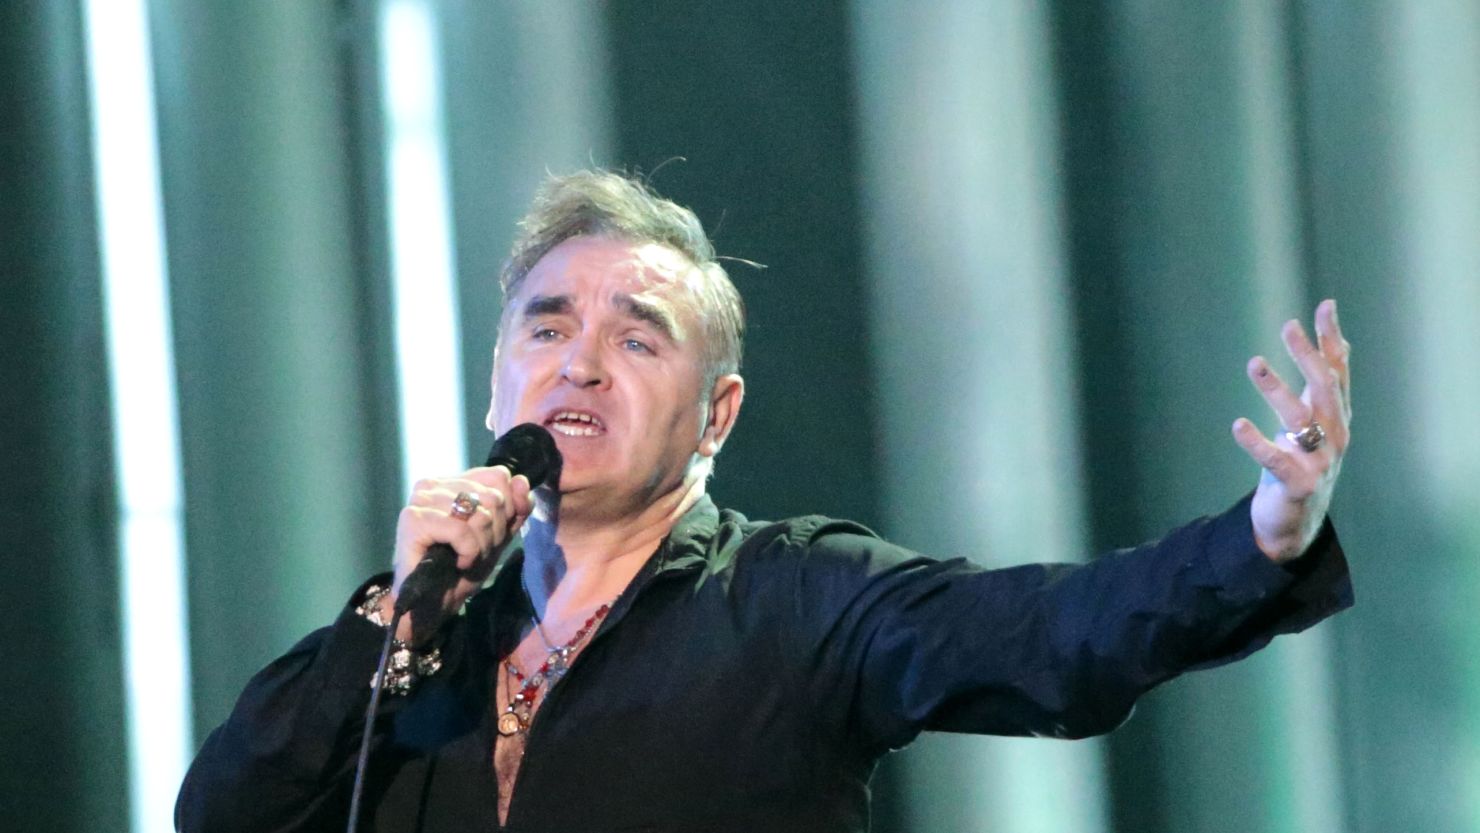 Singer Morrissey performs in 2013 during the Nobel Peace Prize concert in Oslo, Norway.